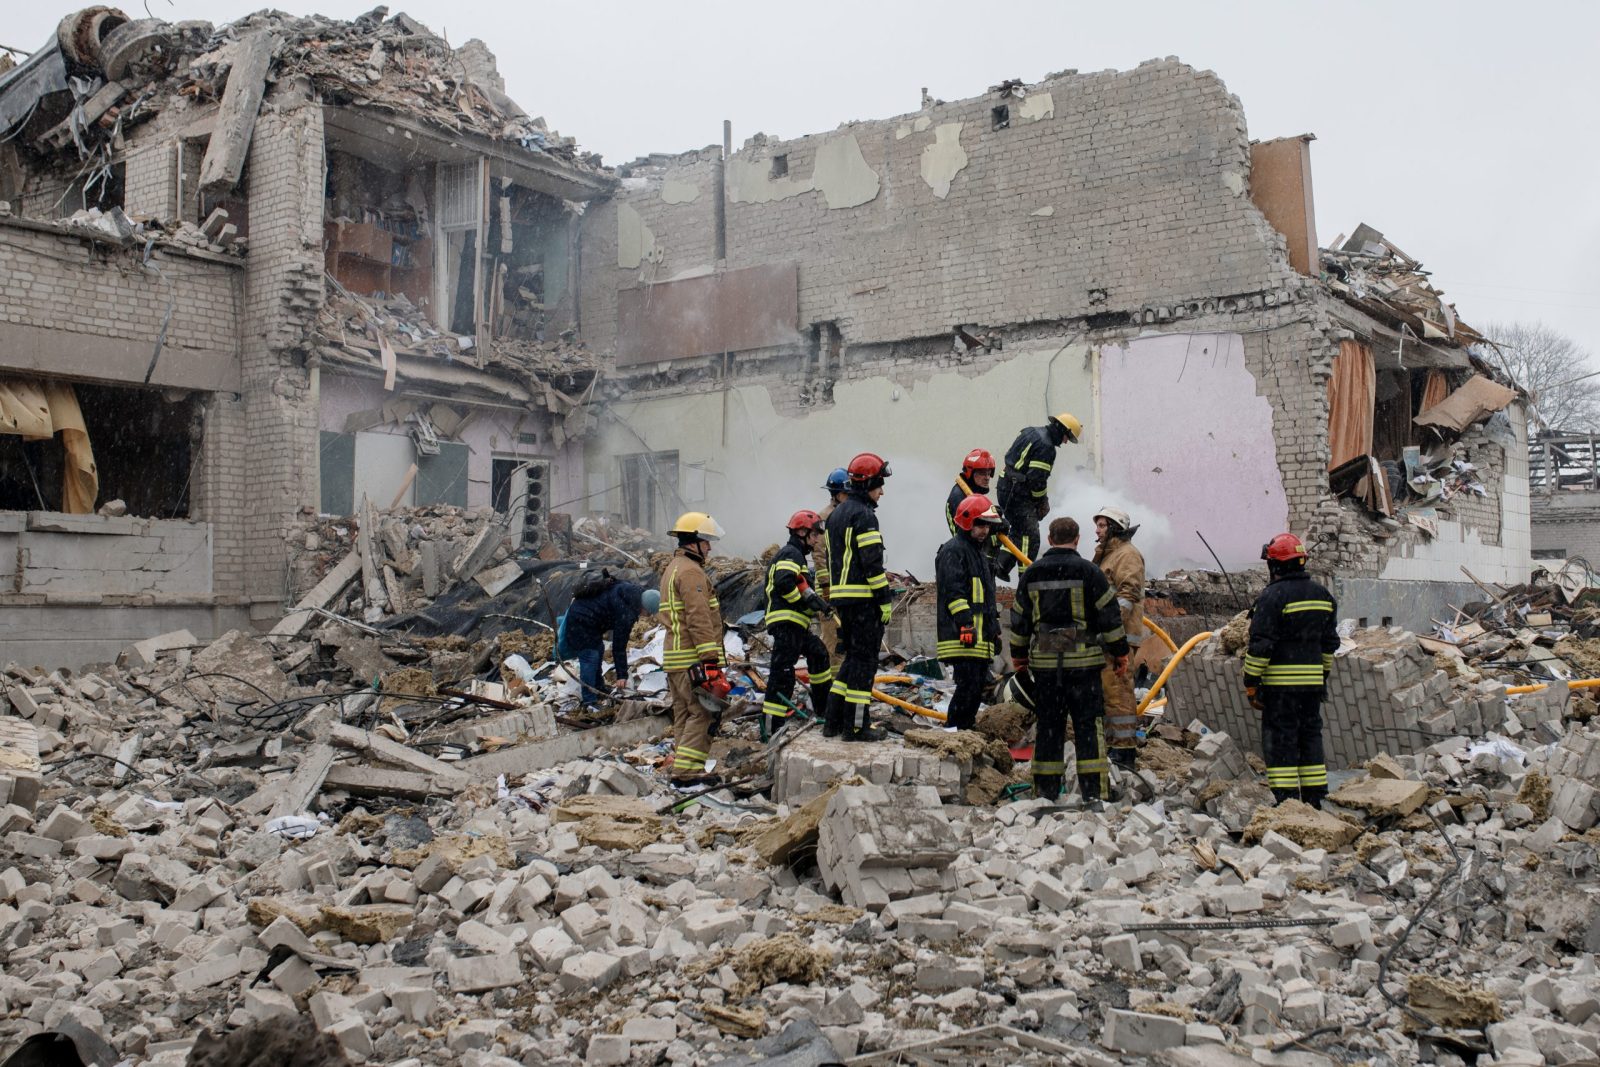 Ukrainian fire fighters searching through rubble